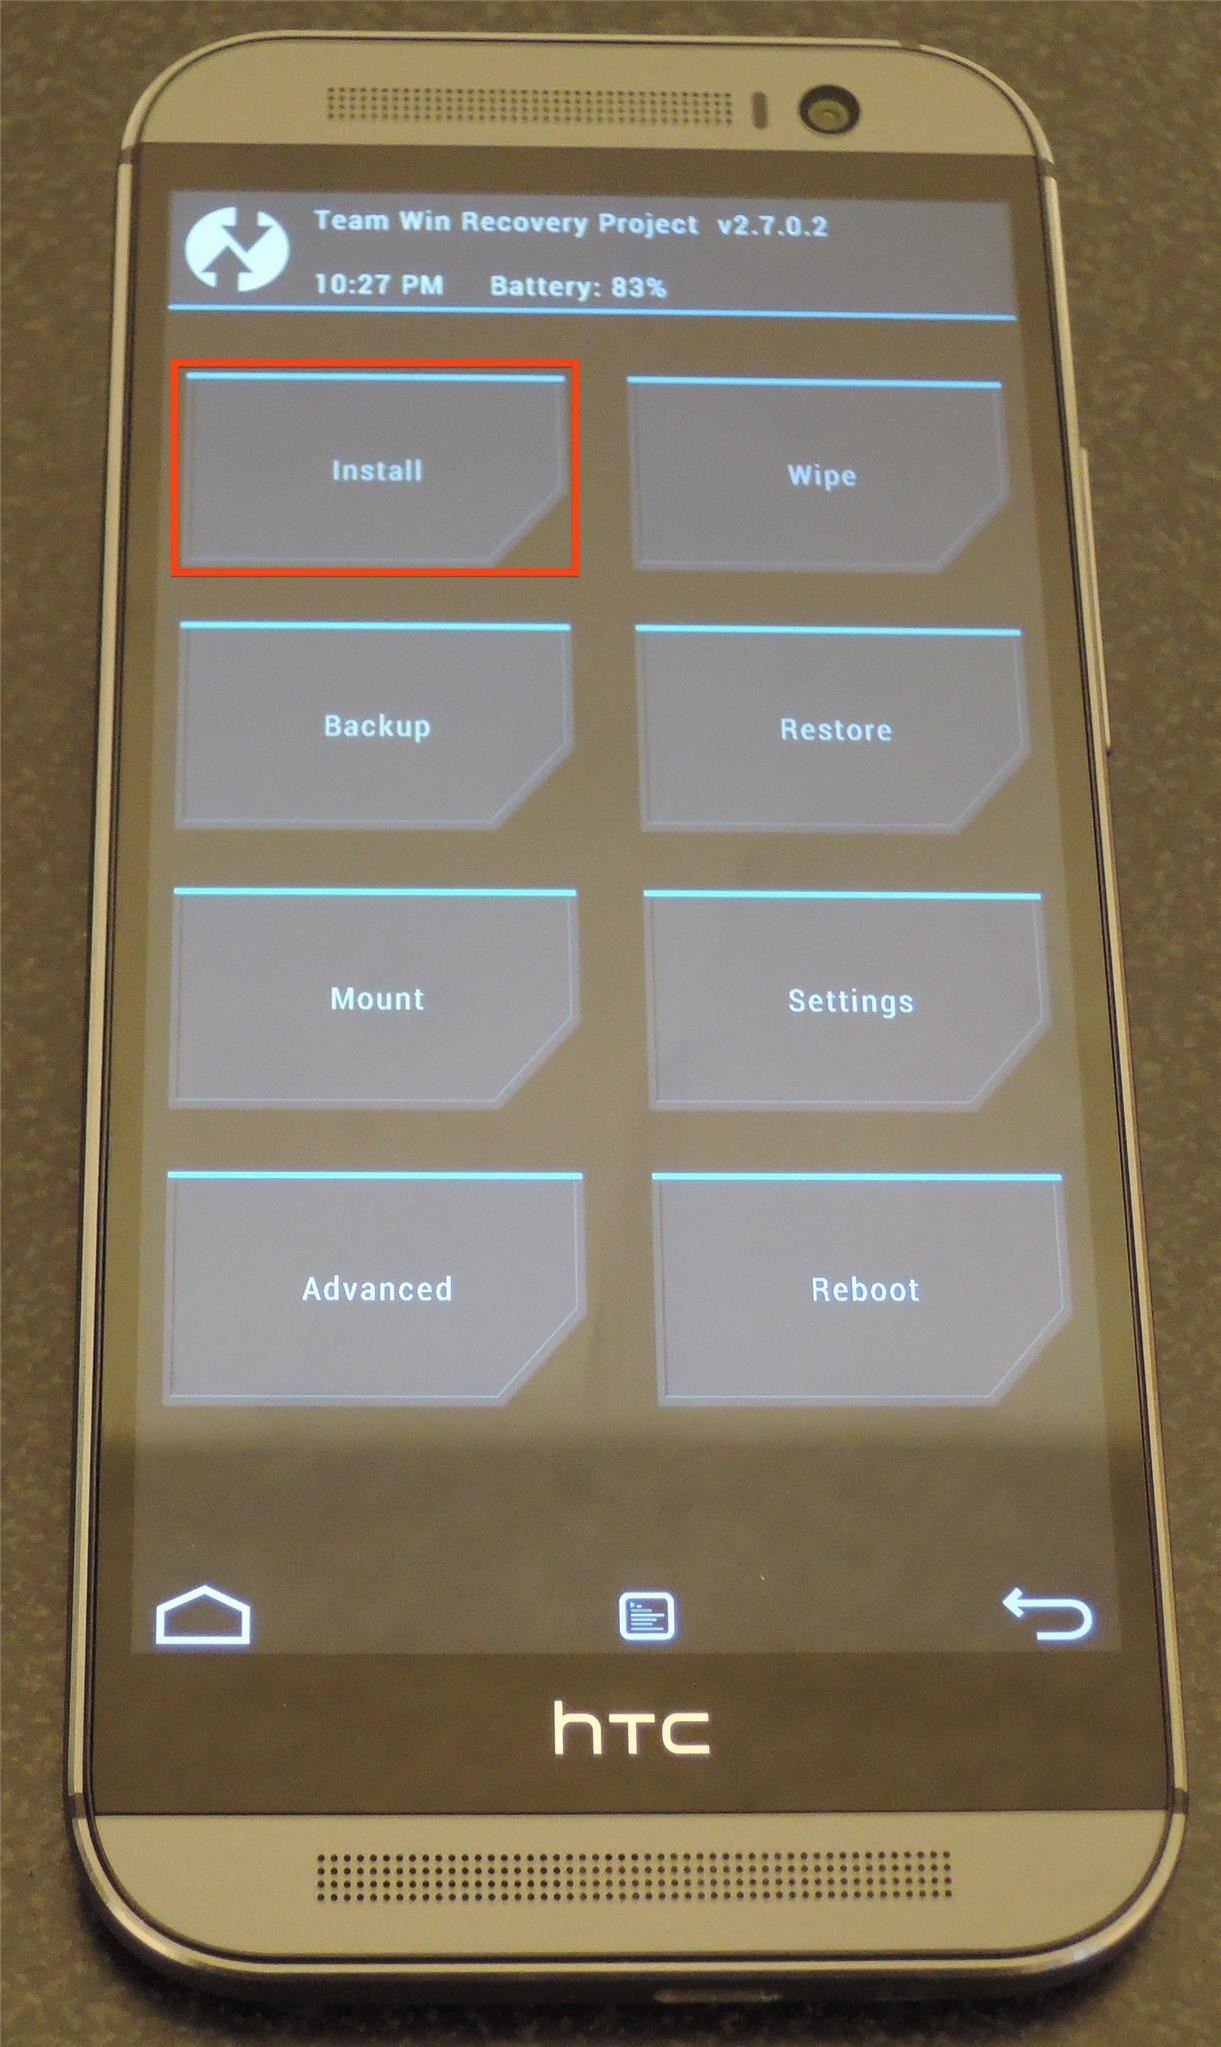 How to Unlock Bootloader and Root your HTC One M8?